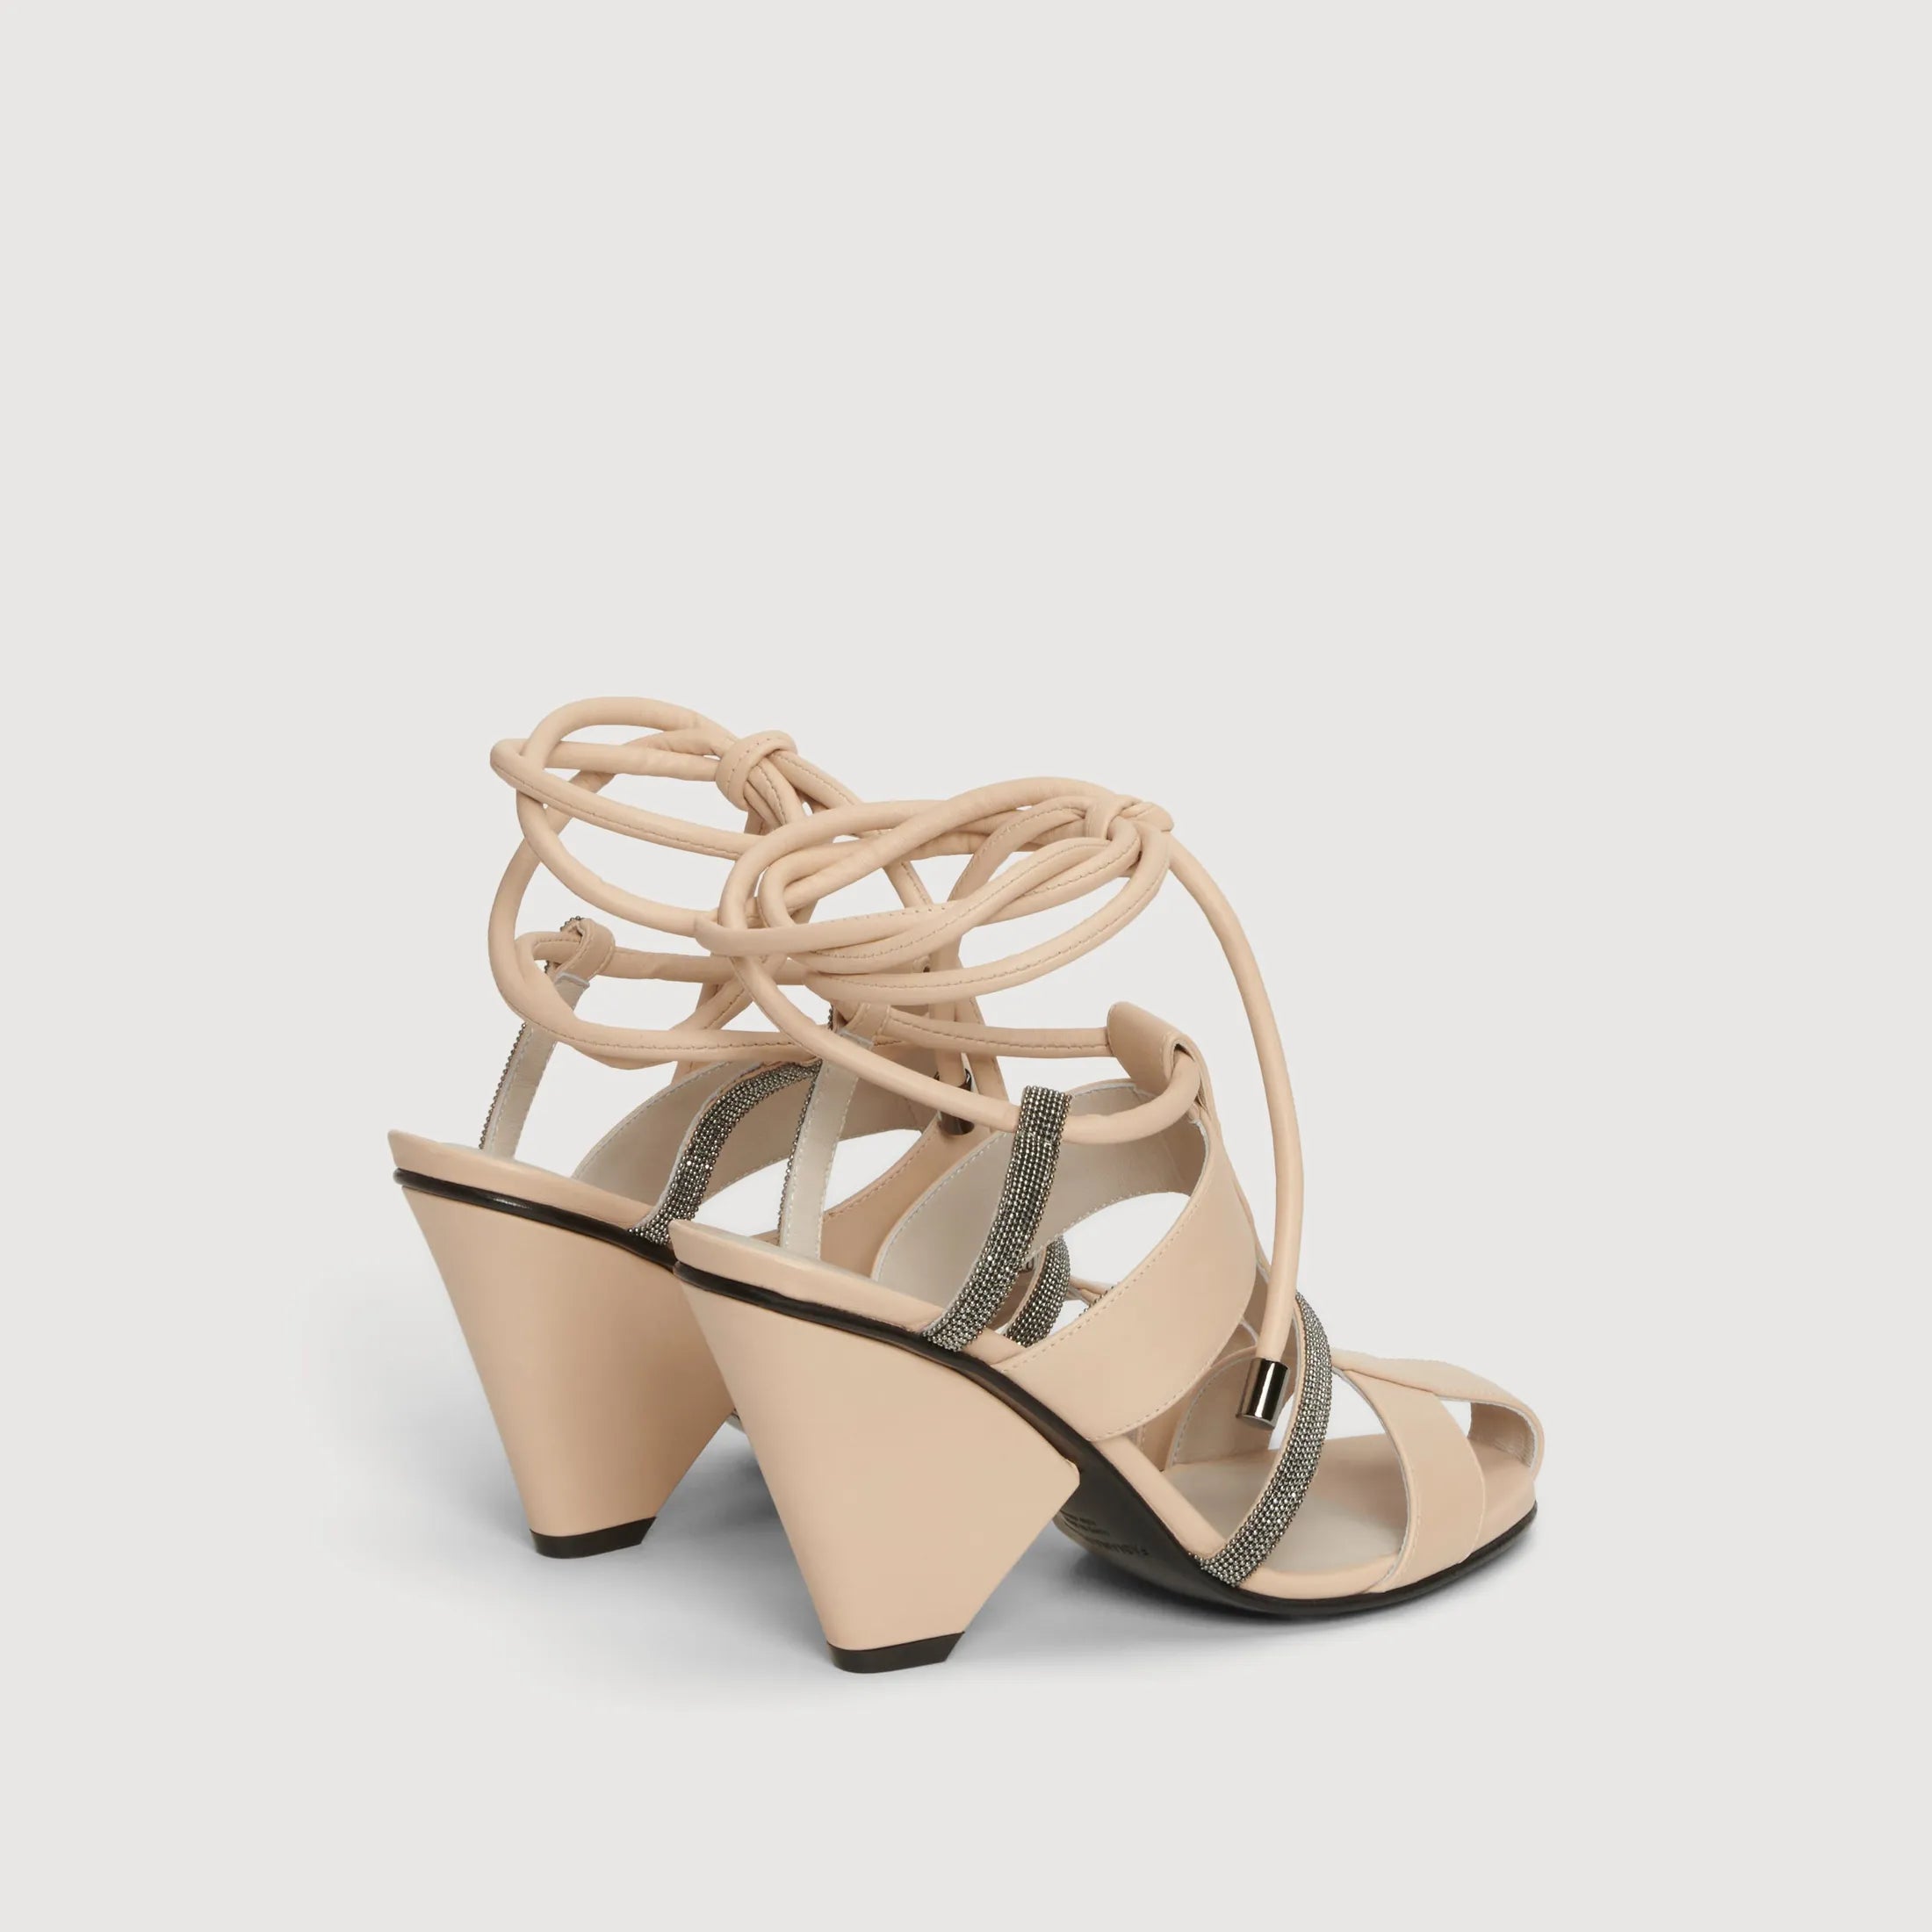 FABIANA FILIPPI - Leather Lace Up Sandals in Nude